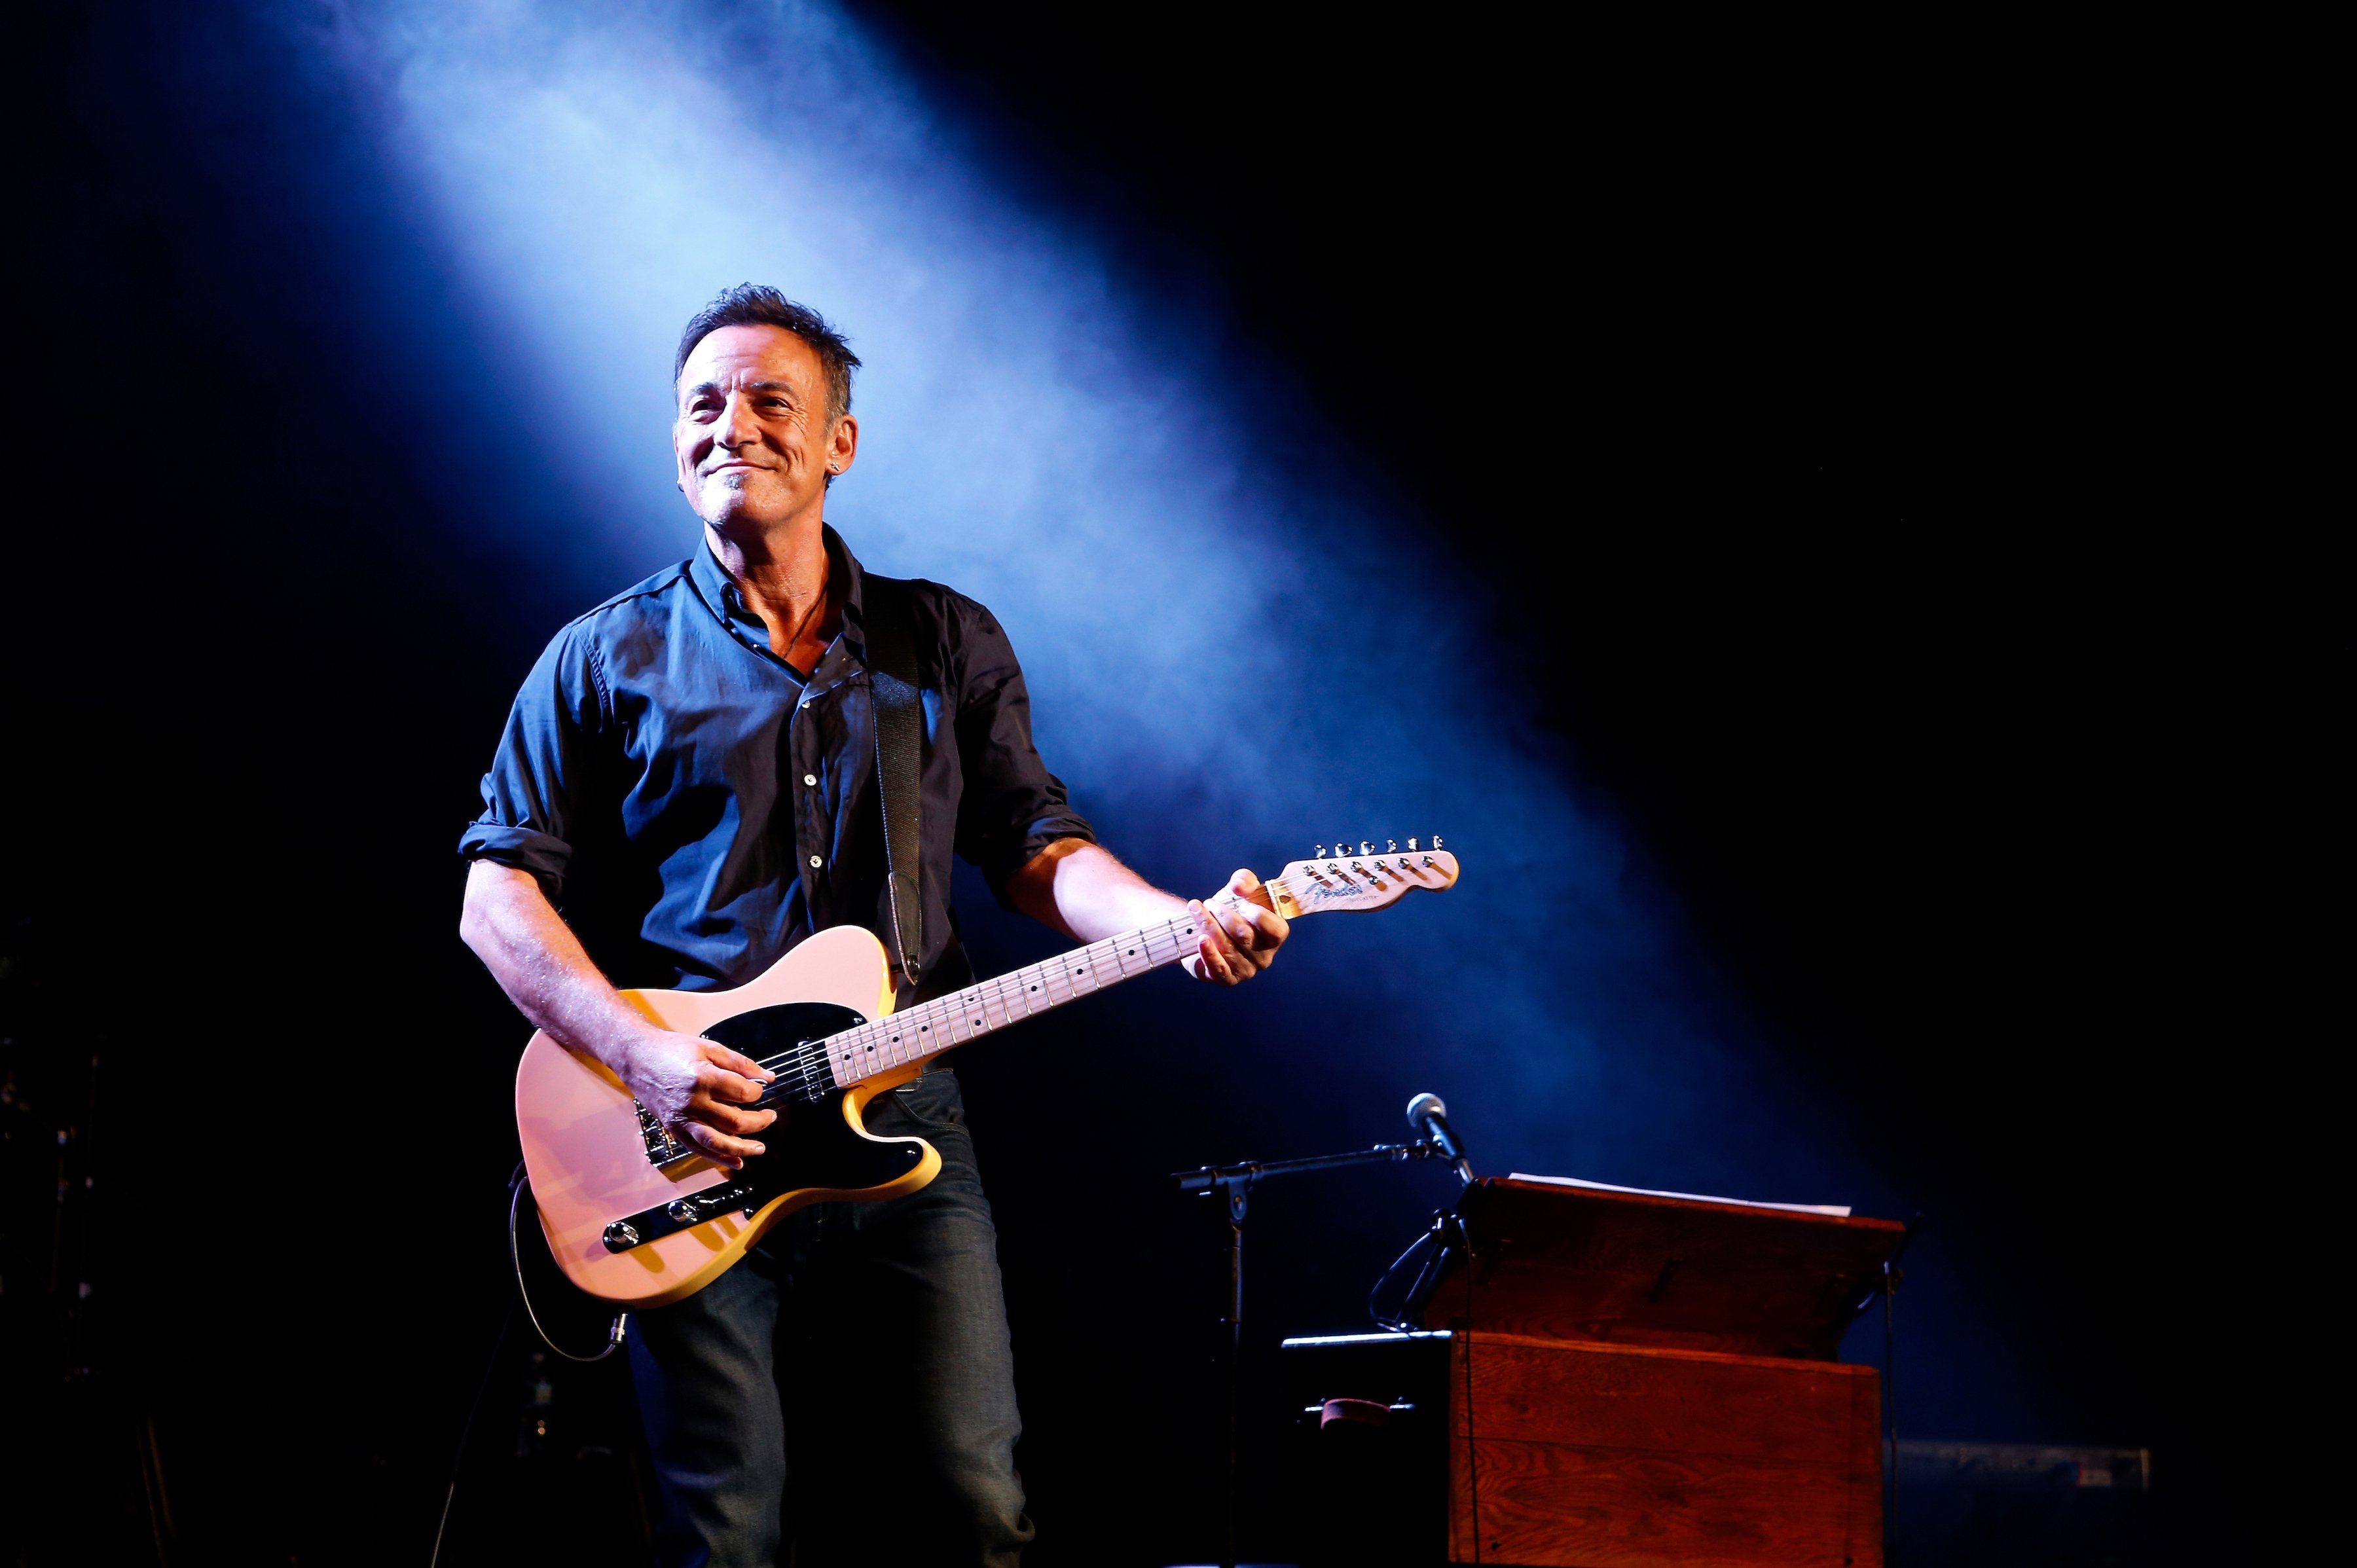 Bruce Springsteen performs at the 7th annual 'Stand Up For Heroes' event at Madison Square Garden